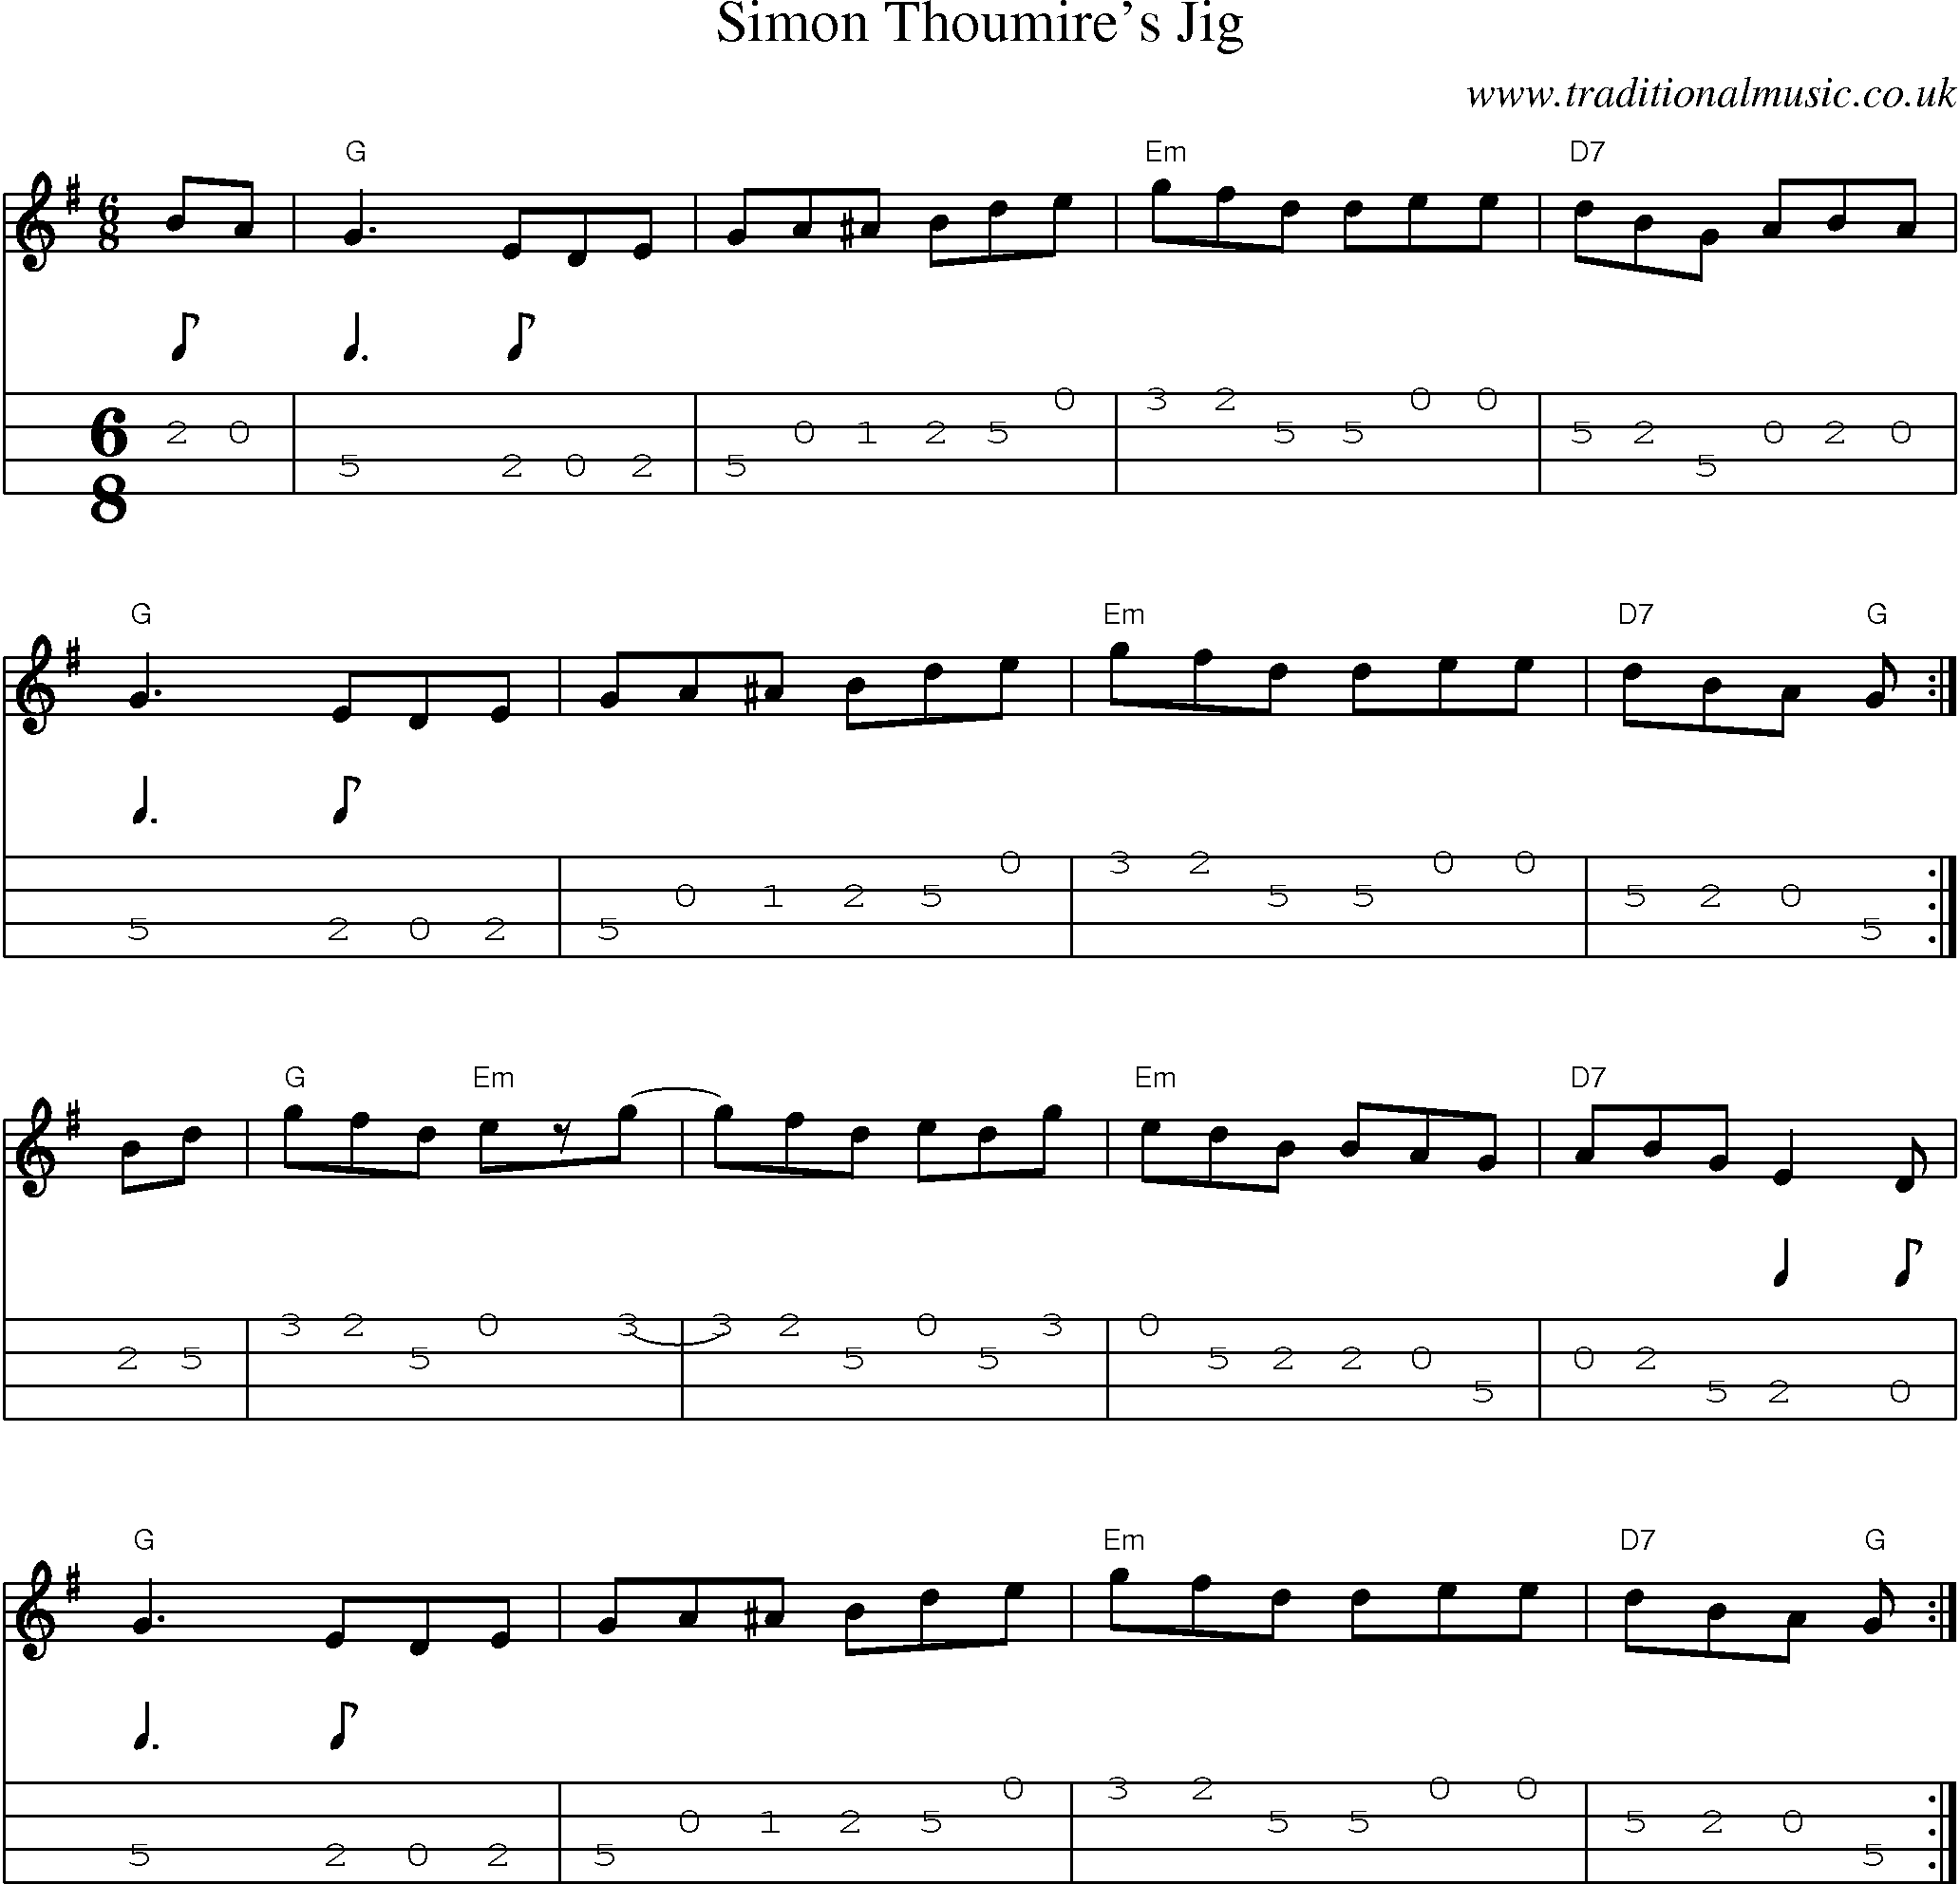 Music Score and Mandolin Tabs for Simon Thoumires Jig